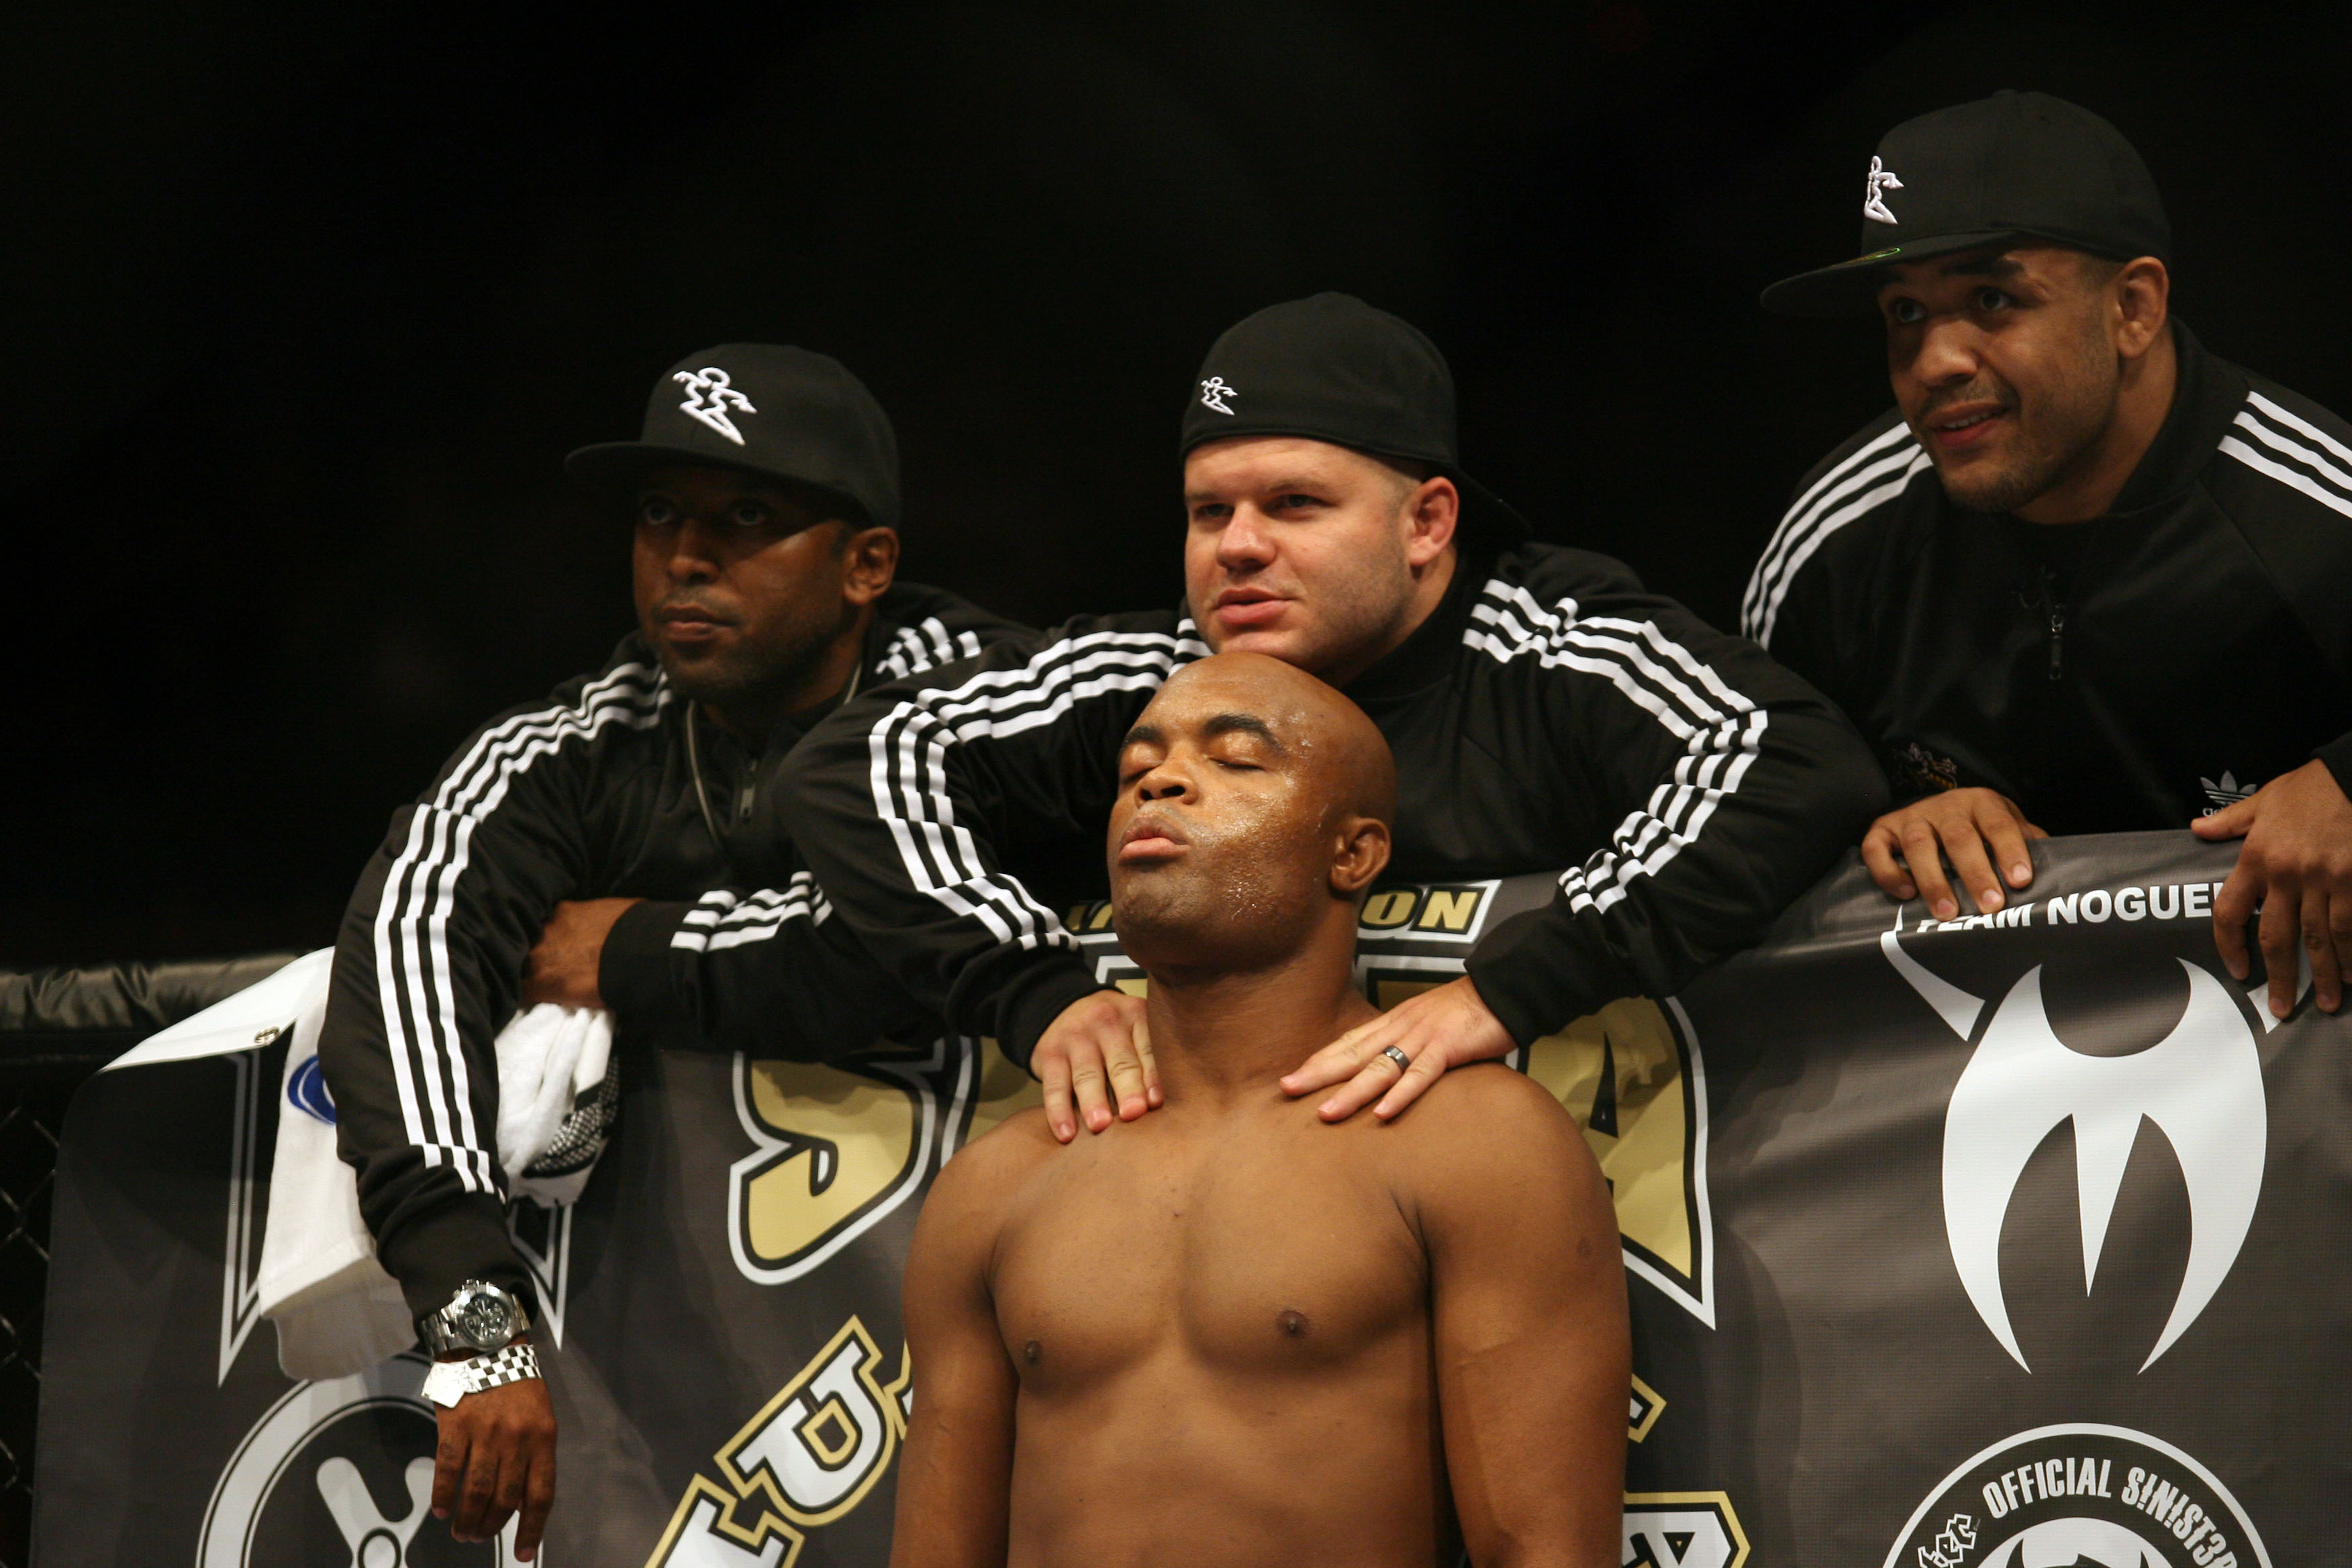 16 of the Most Legendary Black MMA Fighters